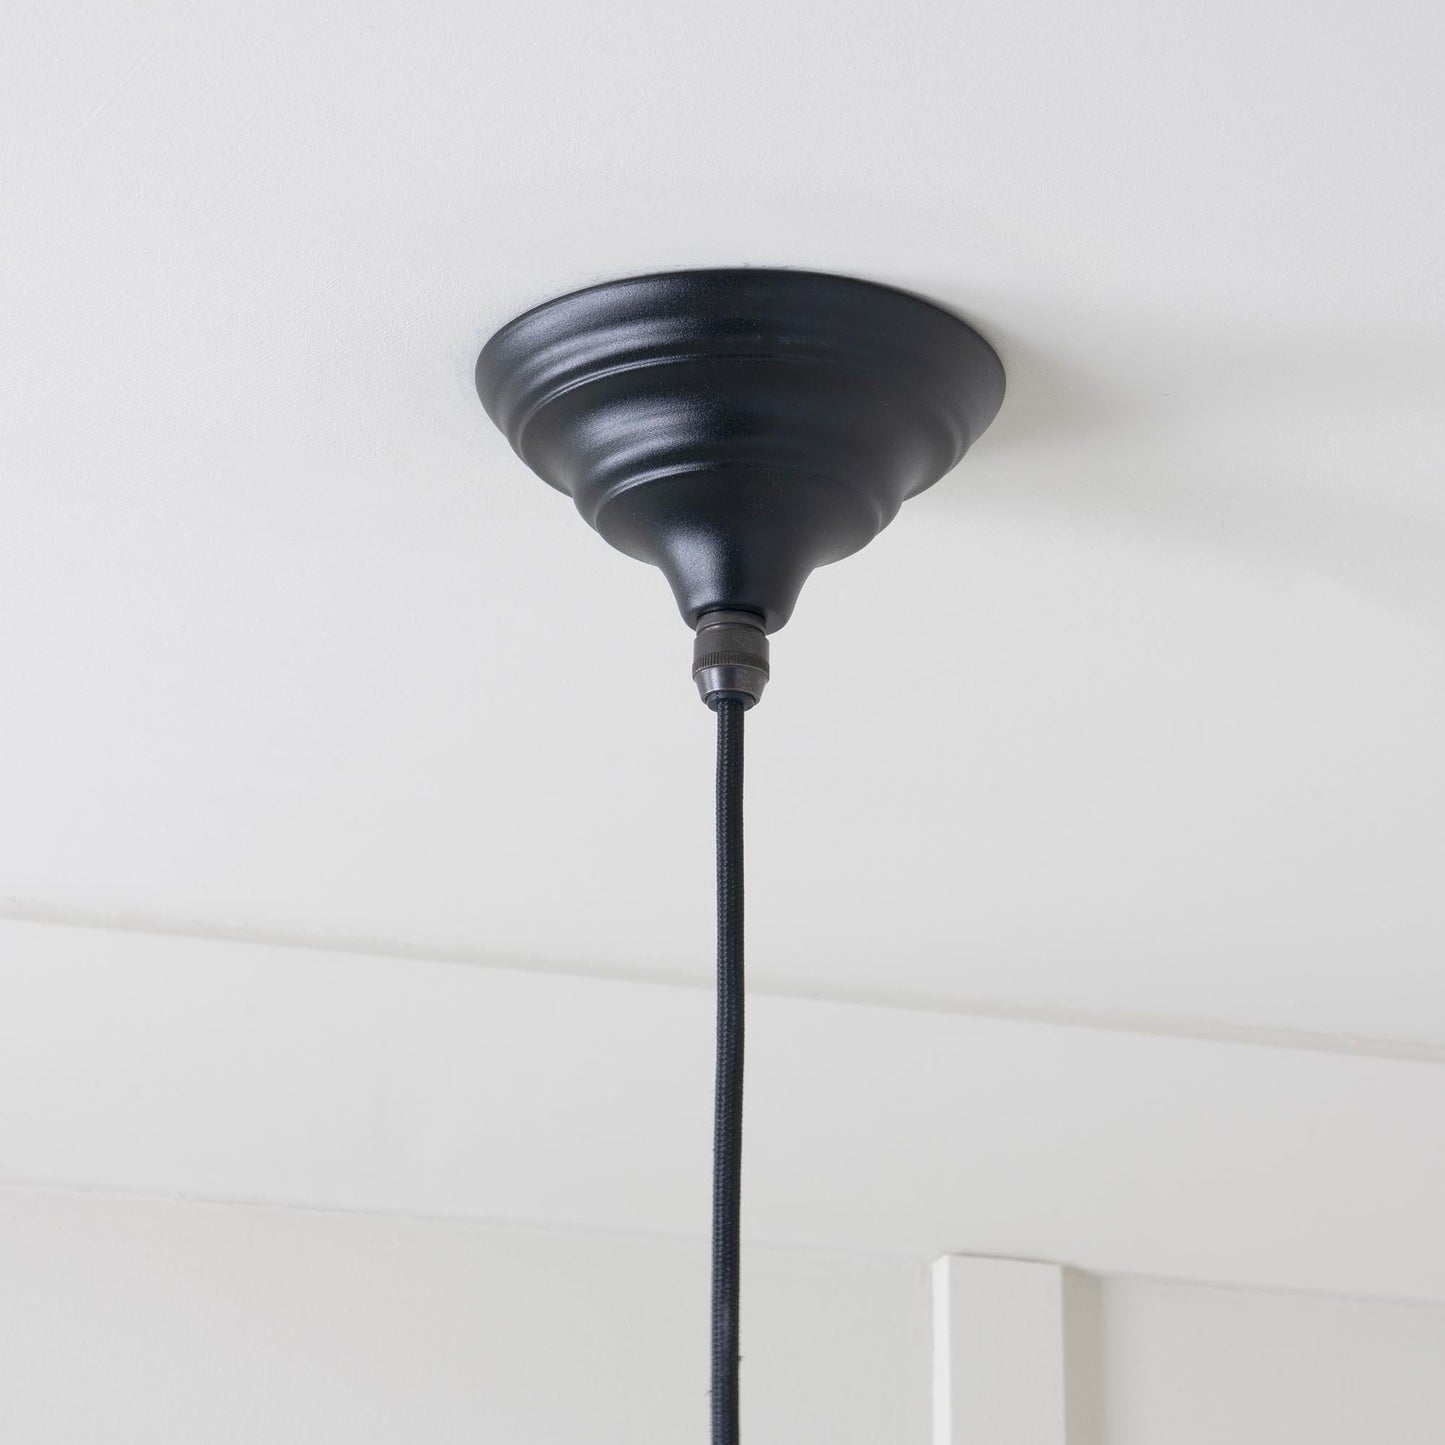 Smooth Brass Harborne Pendant Light Elan Black, close up view of fitting and cable.